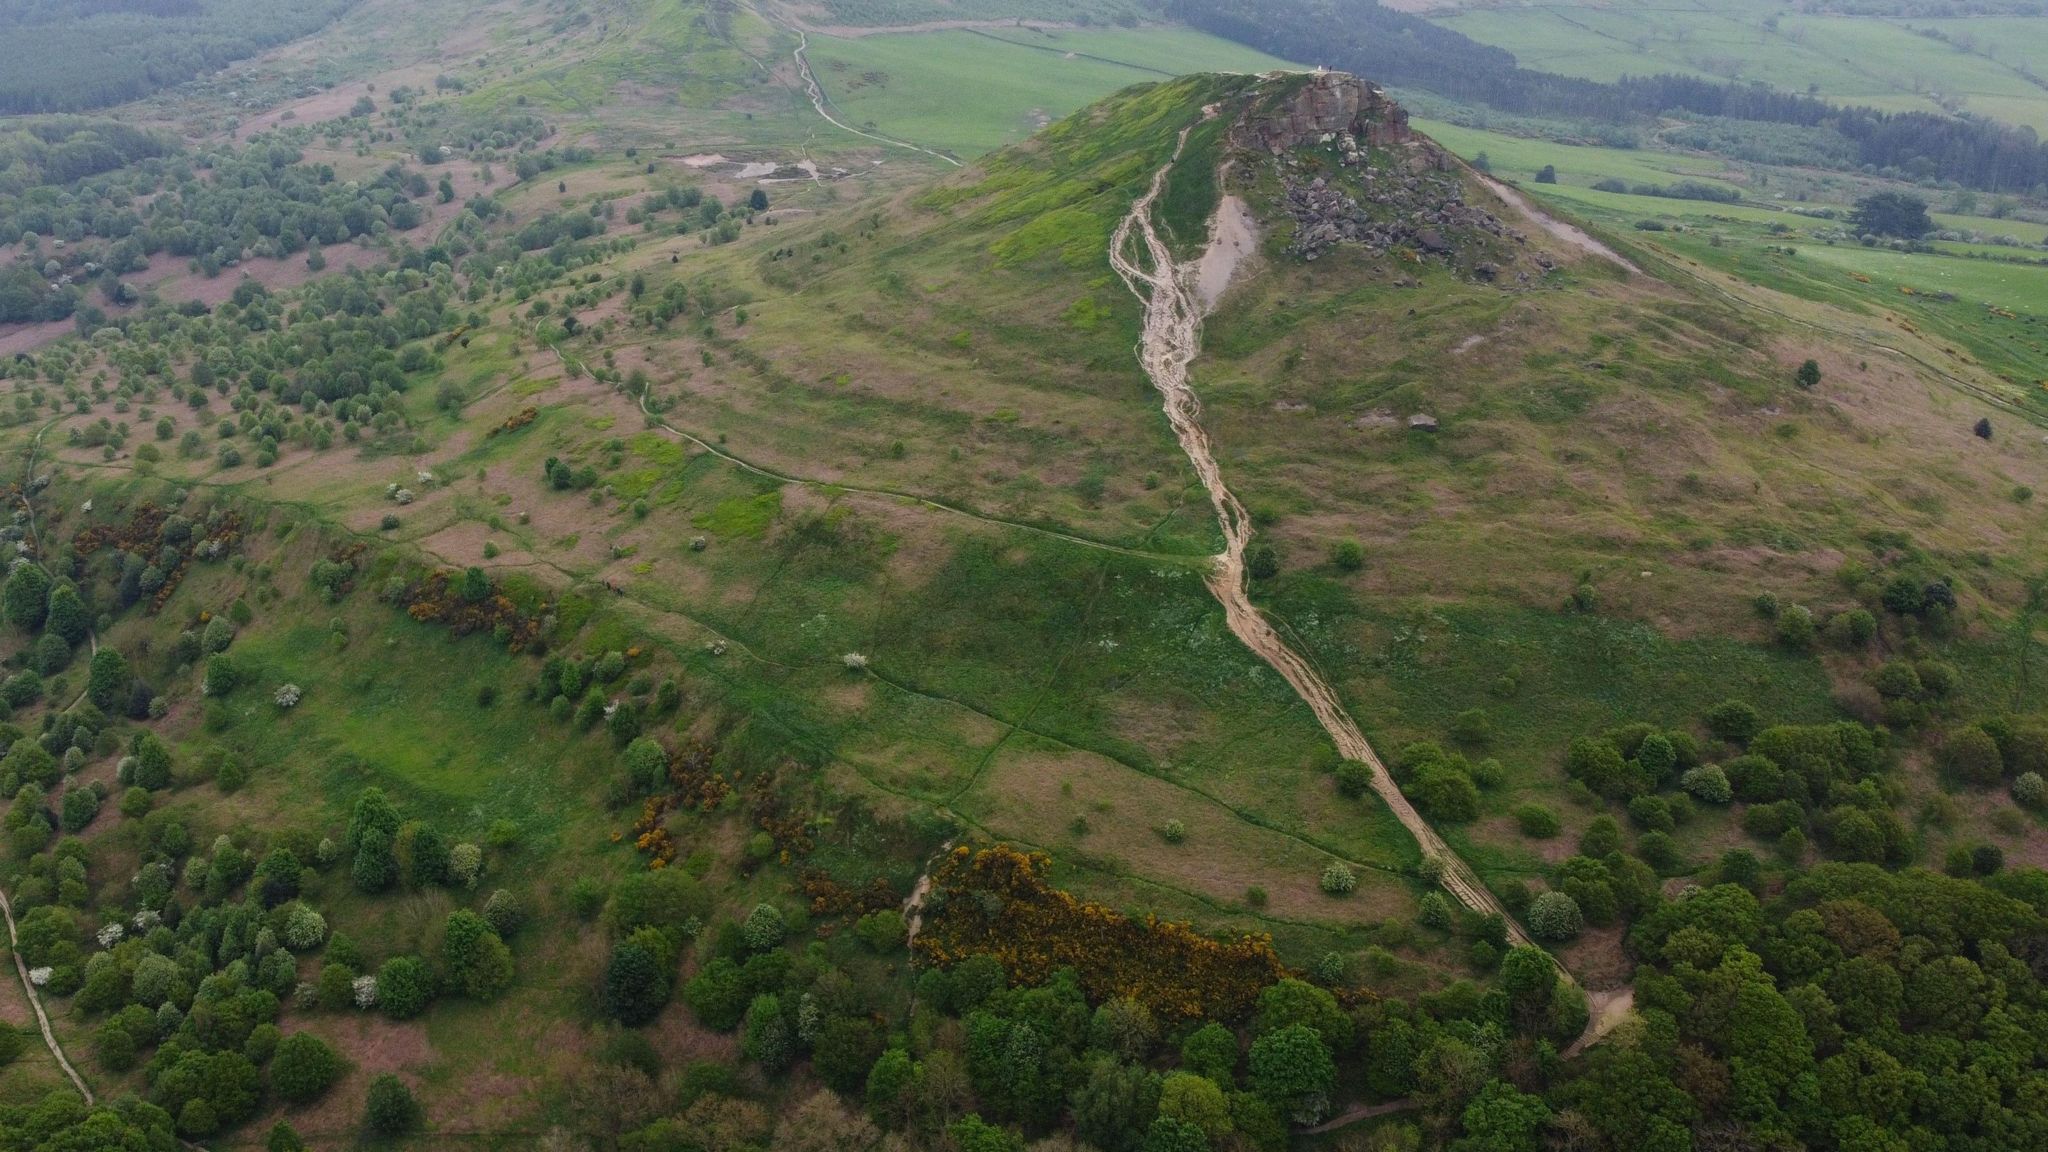 Drone shot of Roseberry Topping showing the path damage